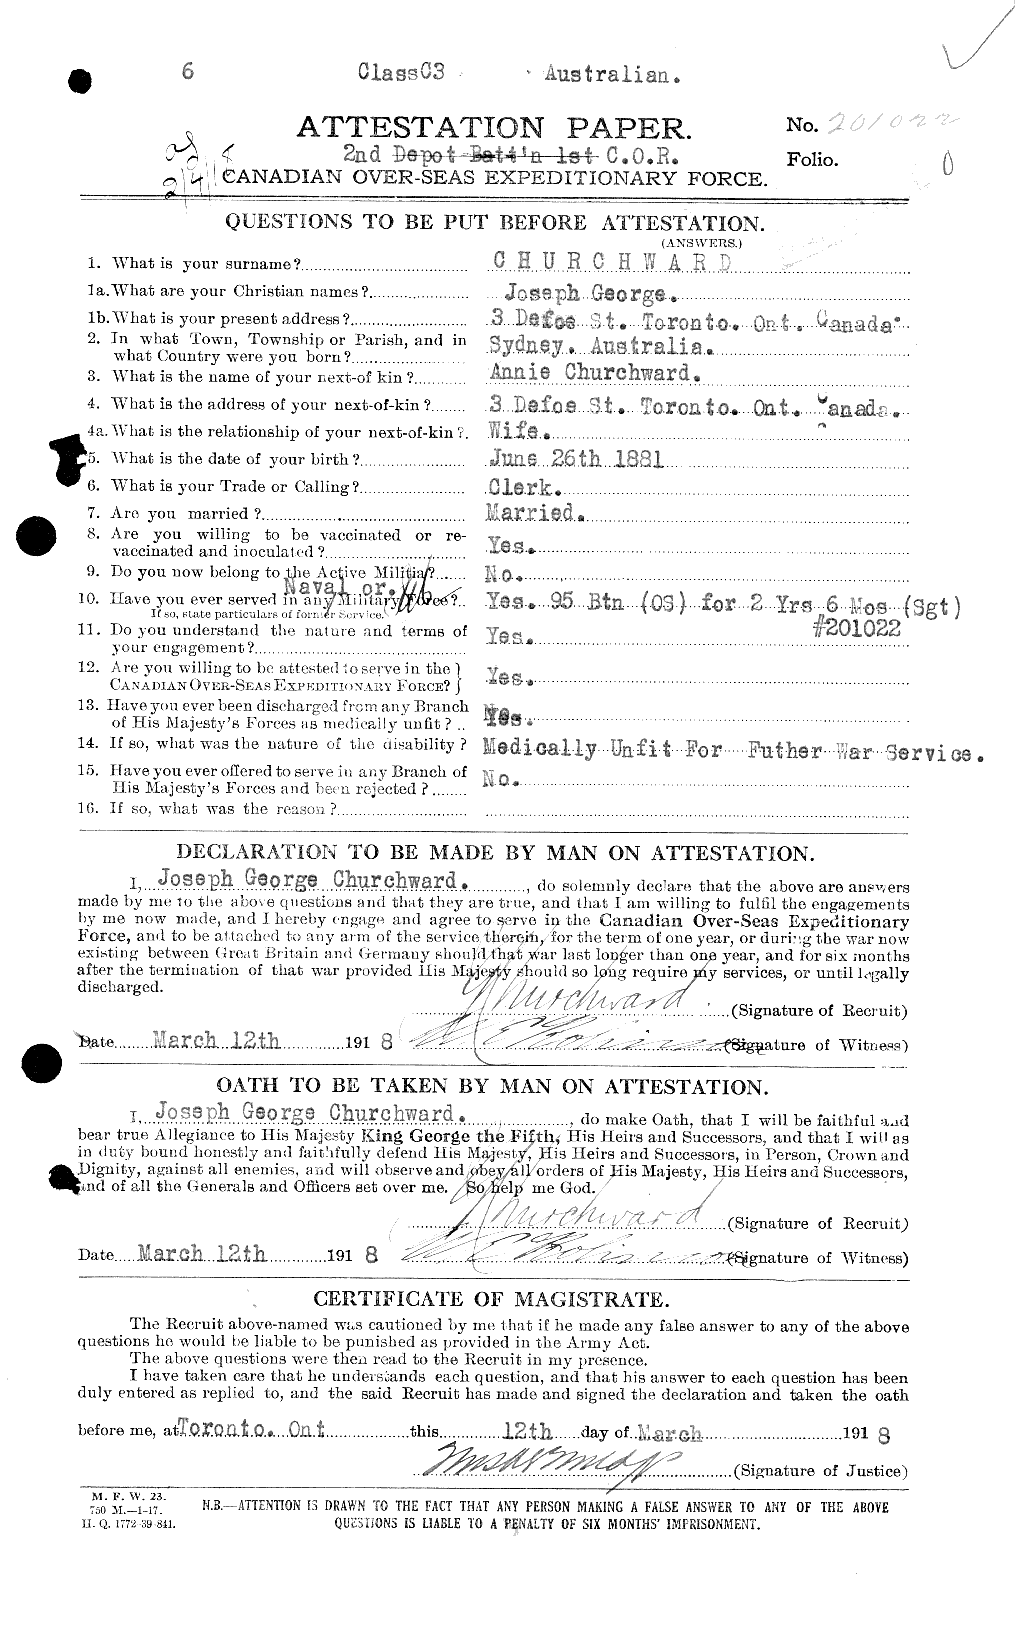 Personnel Records of the First World War - CEF 022518c